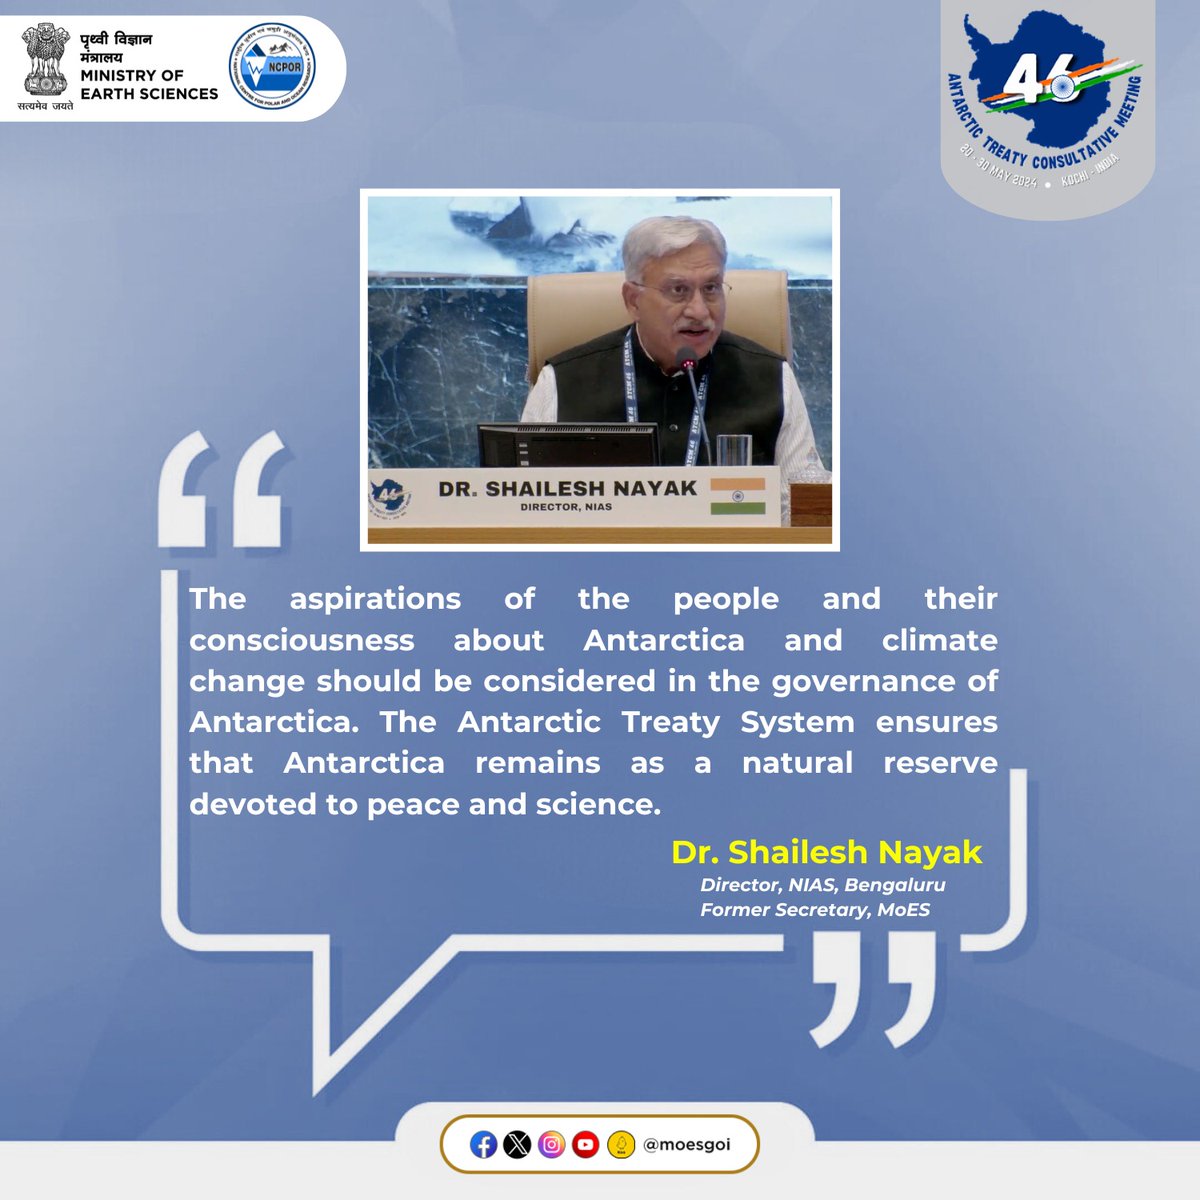 Dr. Shailesh Nayak, Director, NIAS, Former Secretary @moesgoi emphasized about the preservation of the scientific sanctity of Antarctica during the Plenary session of the 46th Antarctic Treaty Consultative Meeting. #ATCM46 #Antarctica #ClimateChange